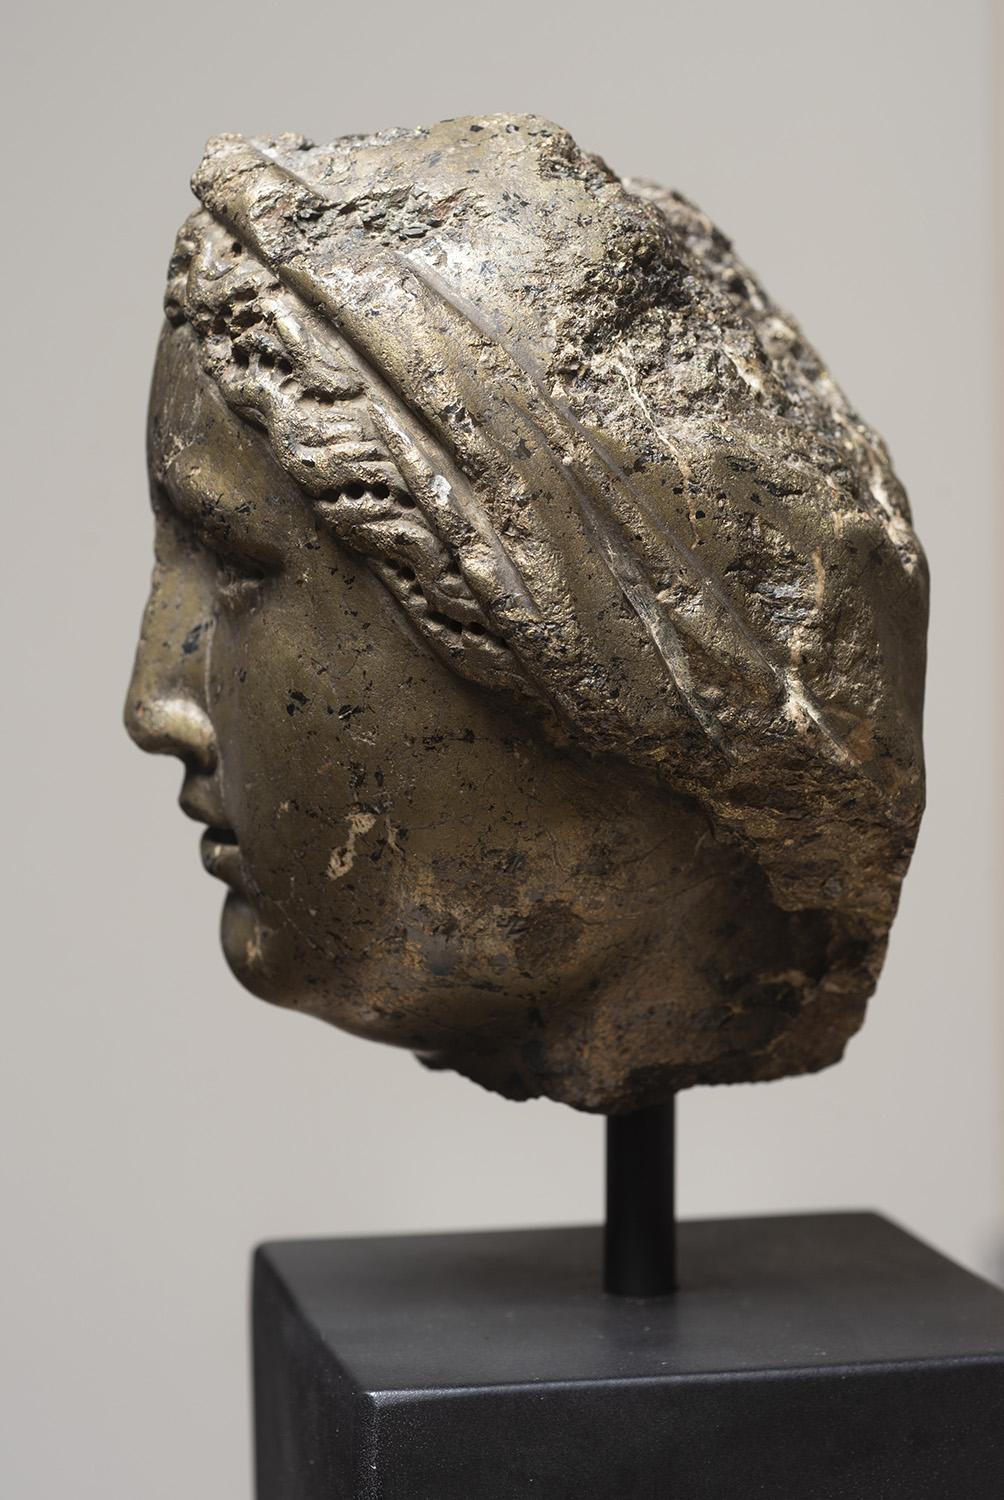 The Head of a Woman by Nicola Pisano